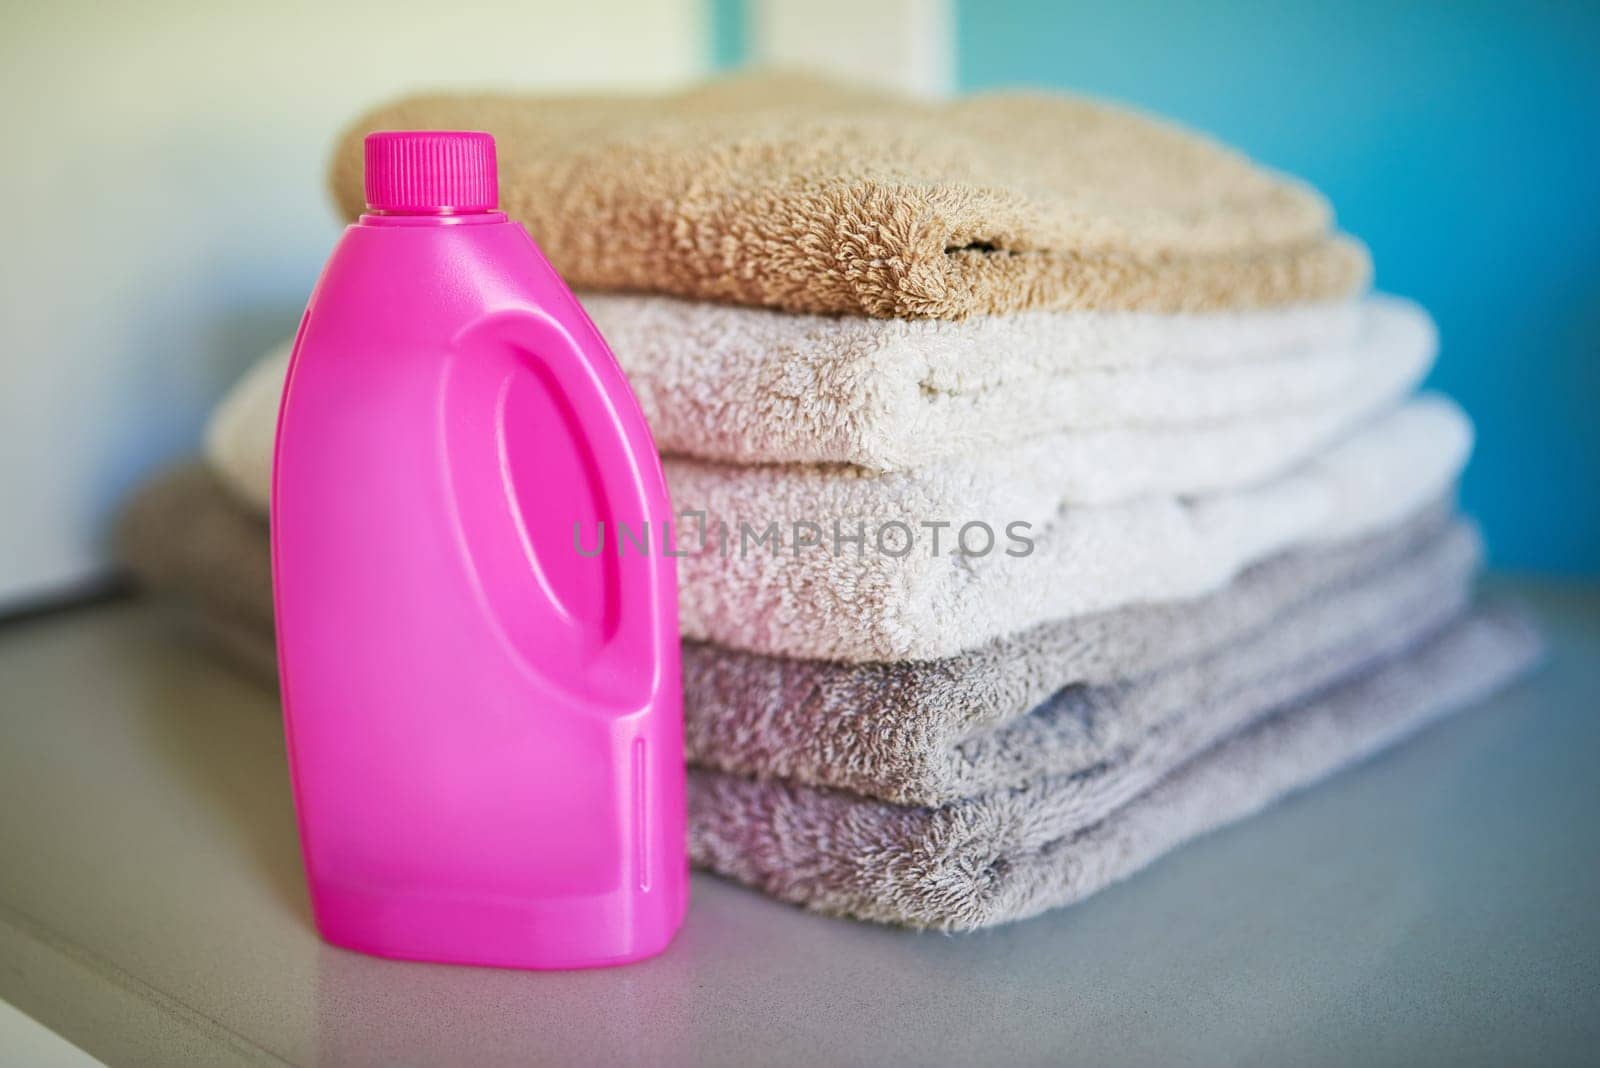 Towels, detergent and washing laundry cleaning or chemical for cotton bacteria, product or household. Cloth, sanitary and folded for neat organizing or linen with soap as service, stack or hygiene.